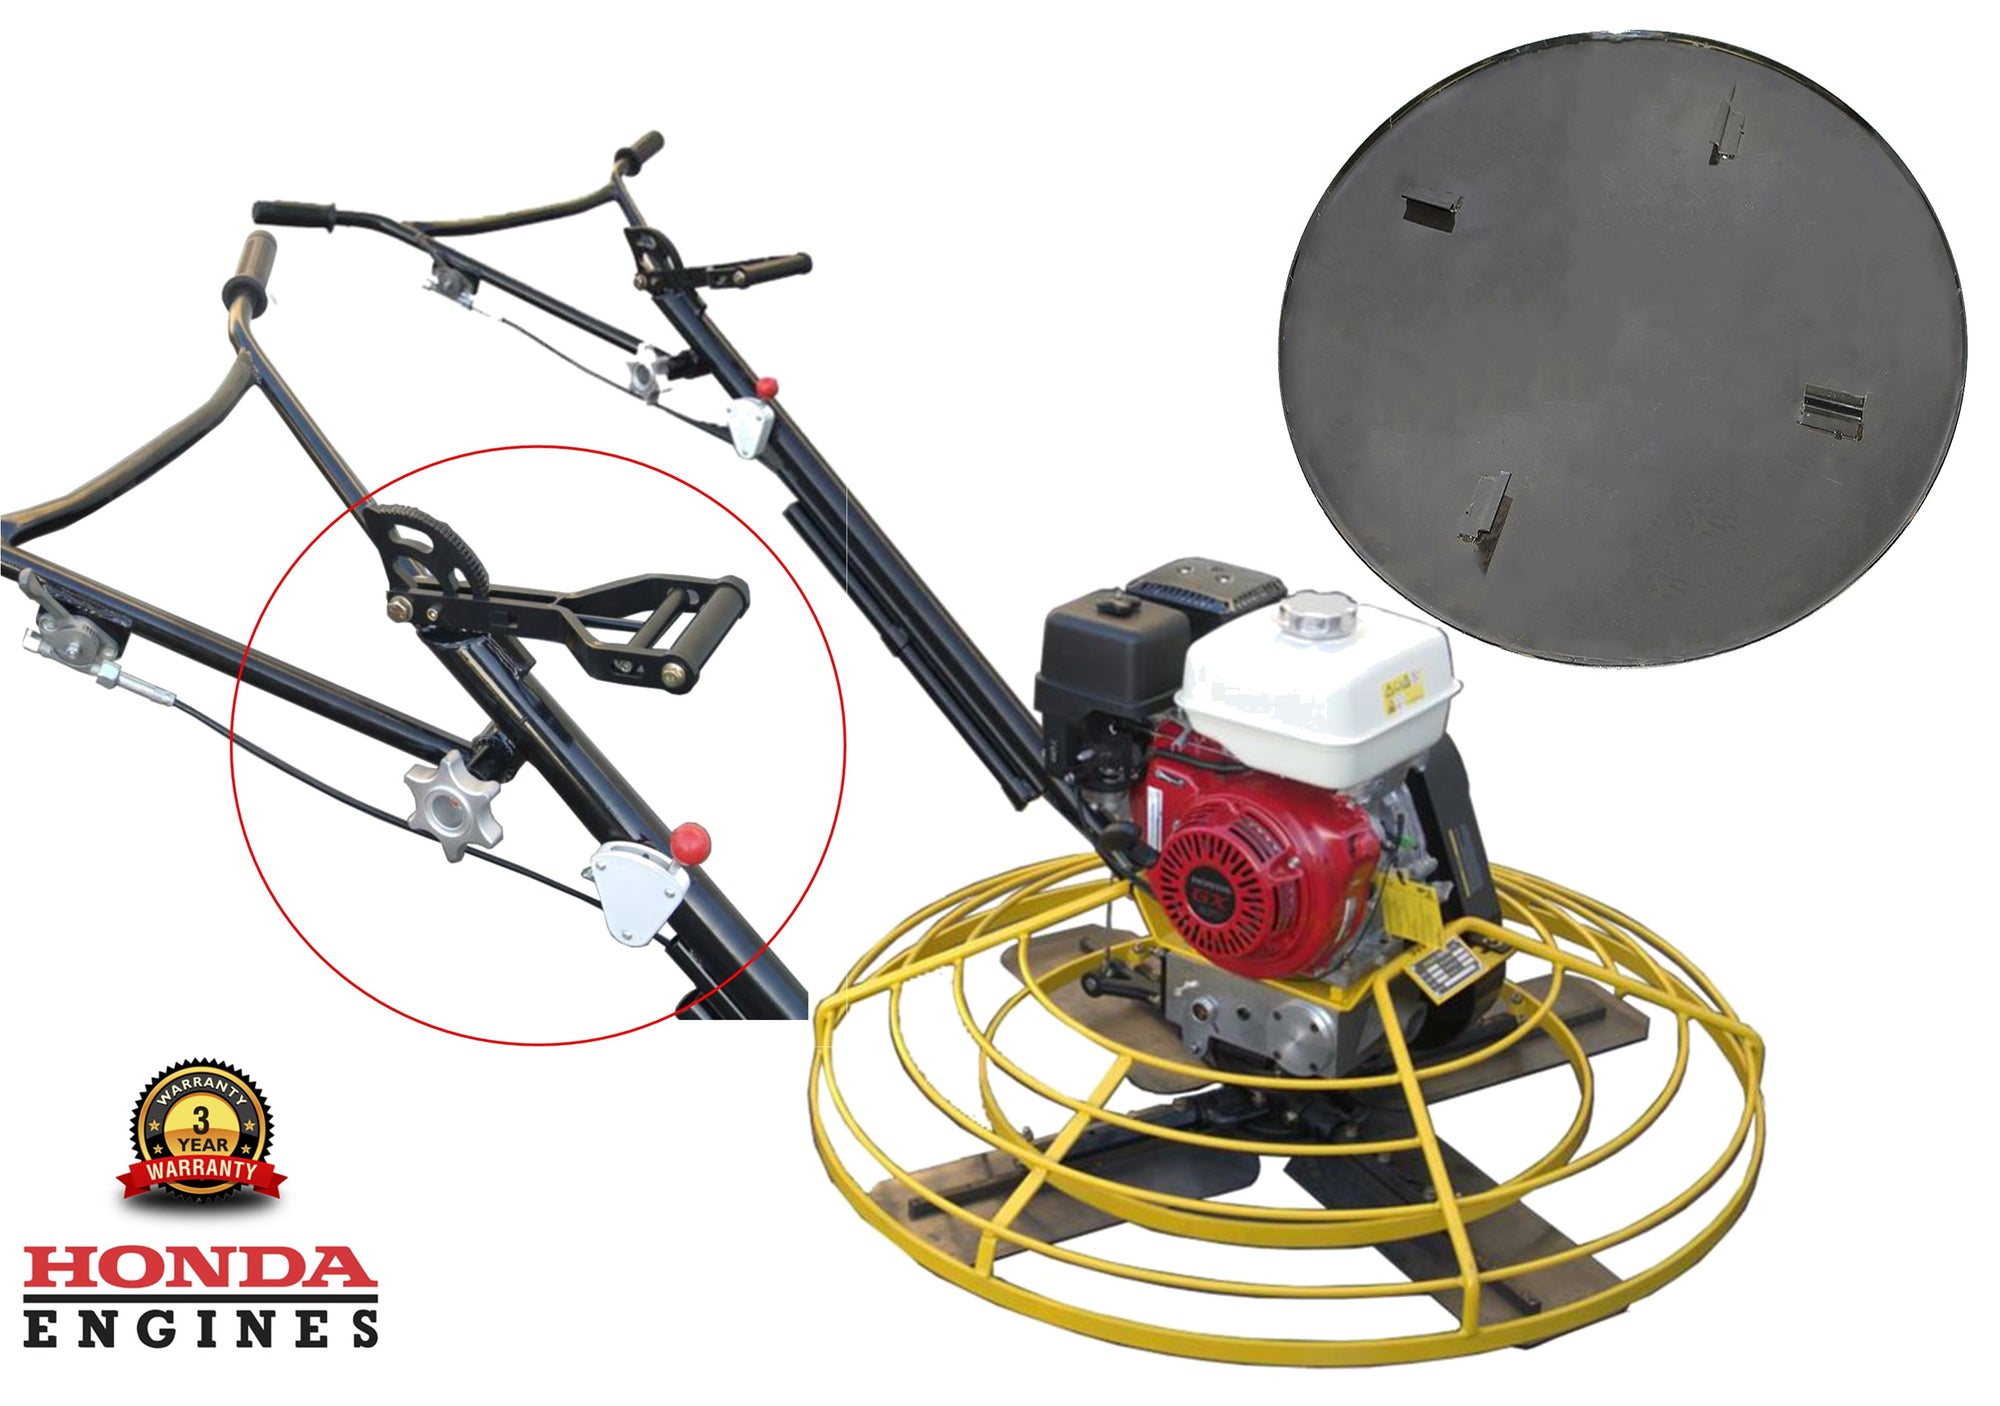 46-Inch Honda Concrete Power Trowel: Featuring GX270 Engine,Pitch Handle Combo Blades, and Float Pan Finishing Tool